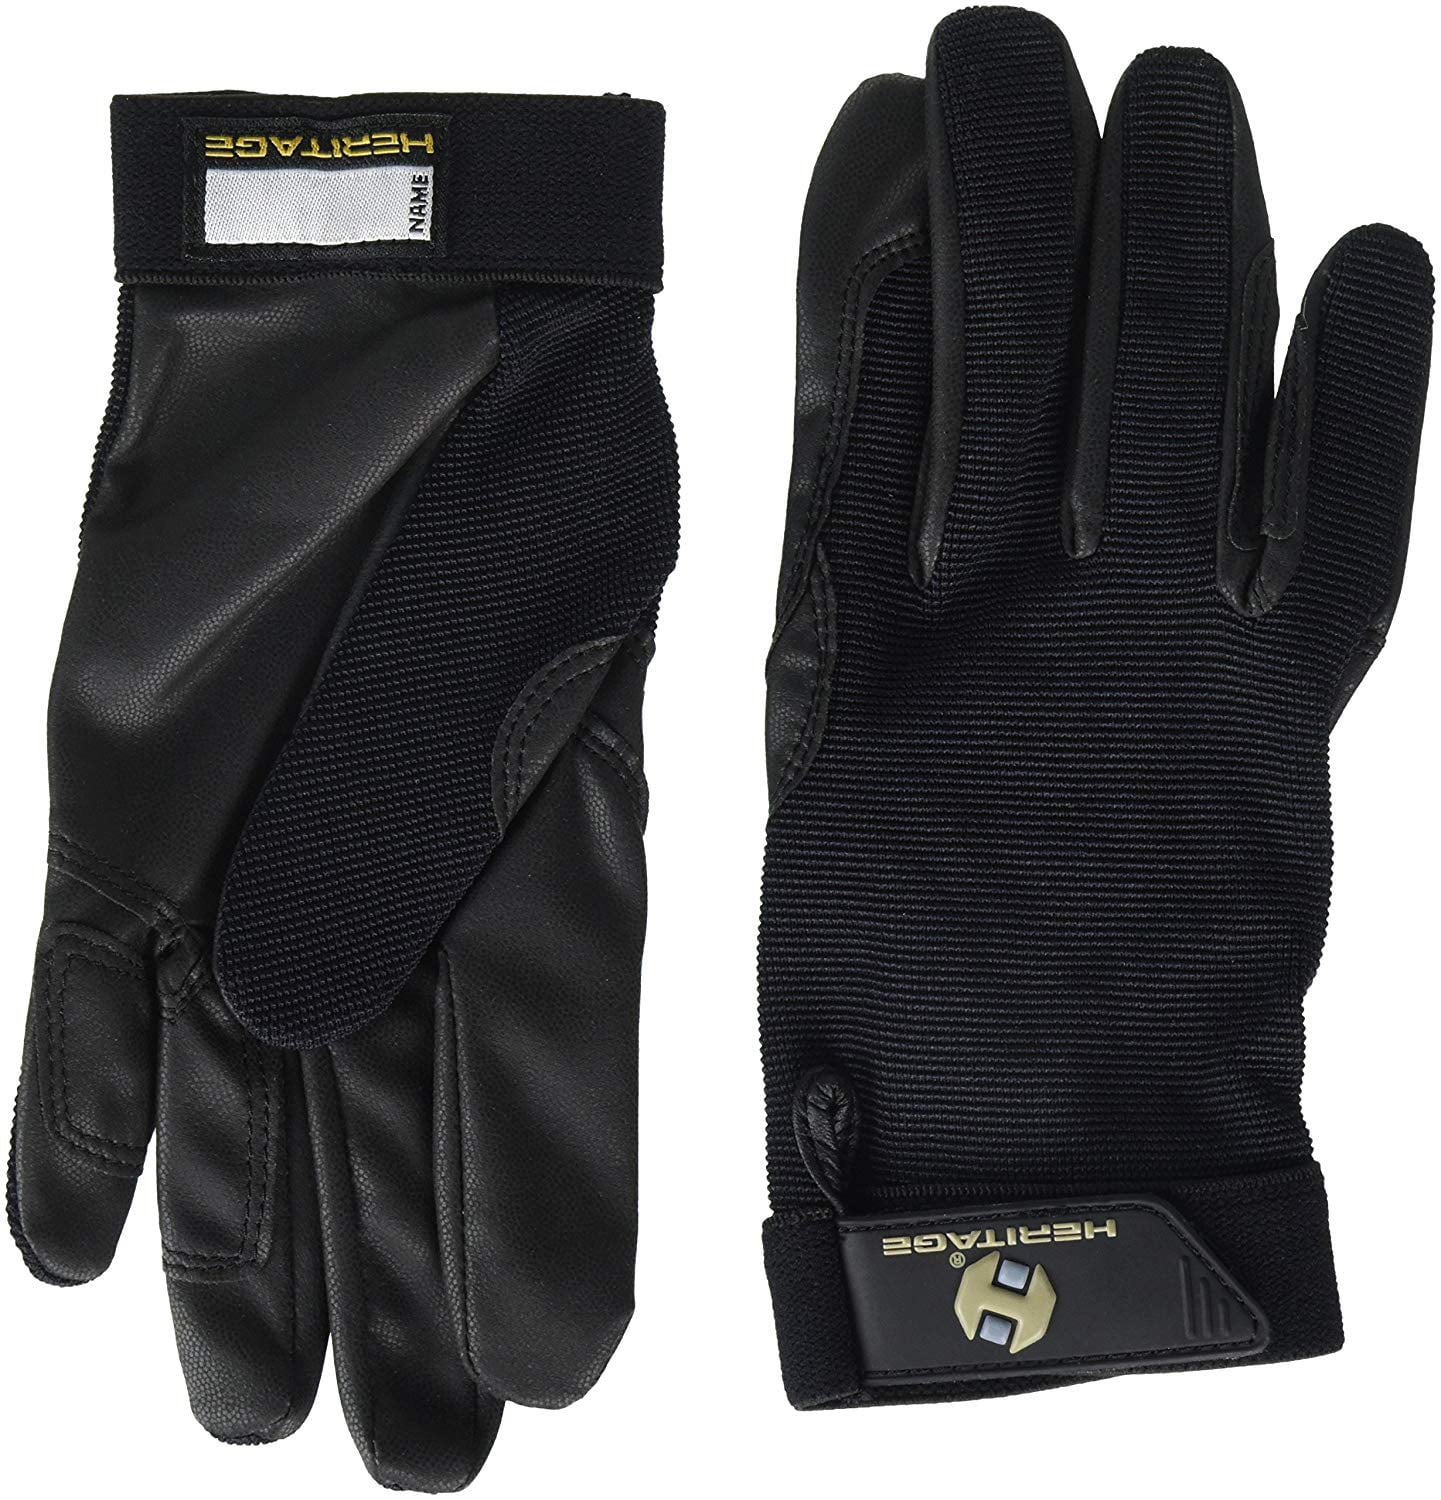 Heritage Gloves Riding Performance Gloves Navy Color 